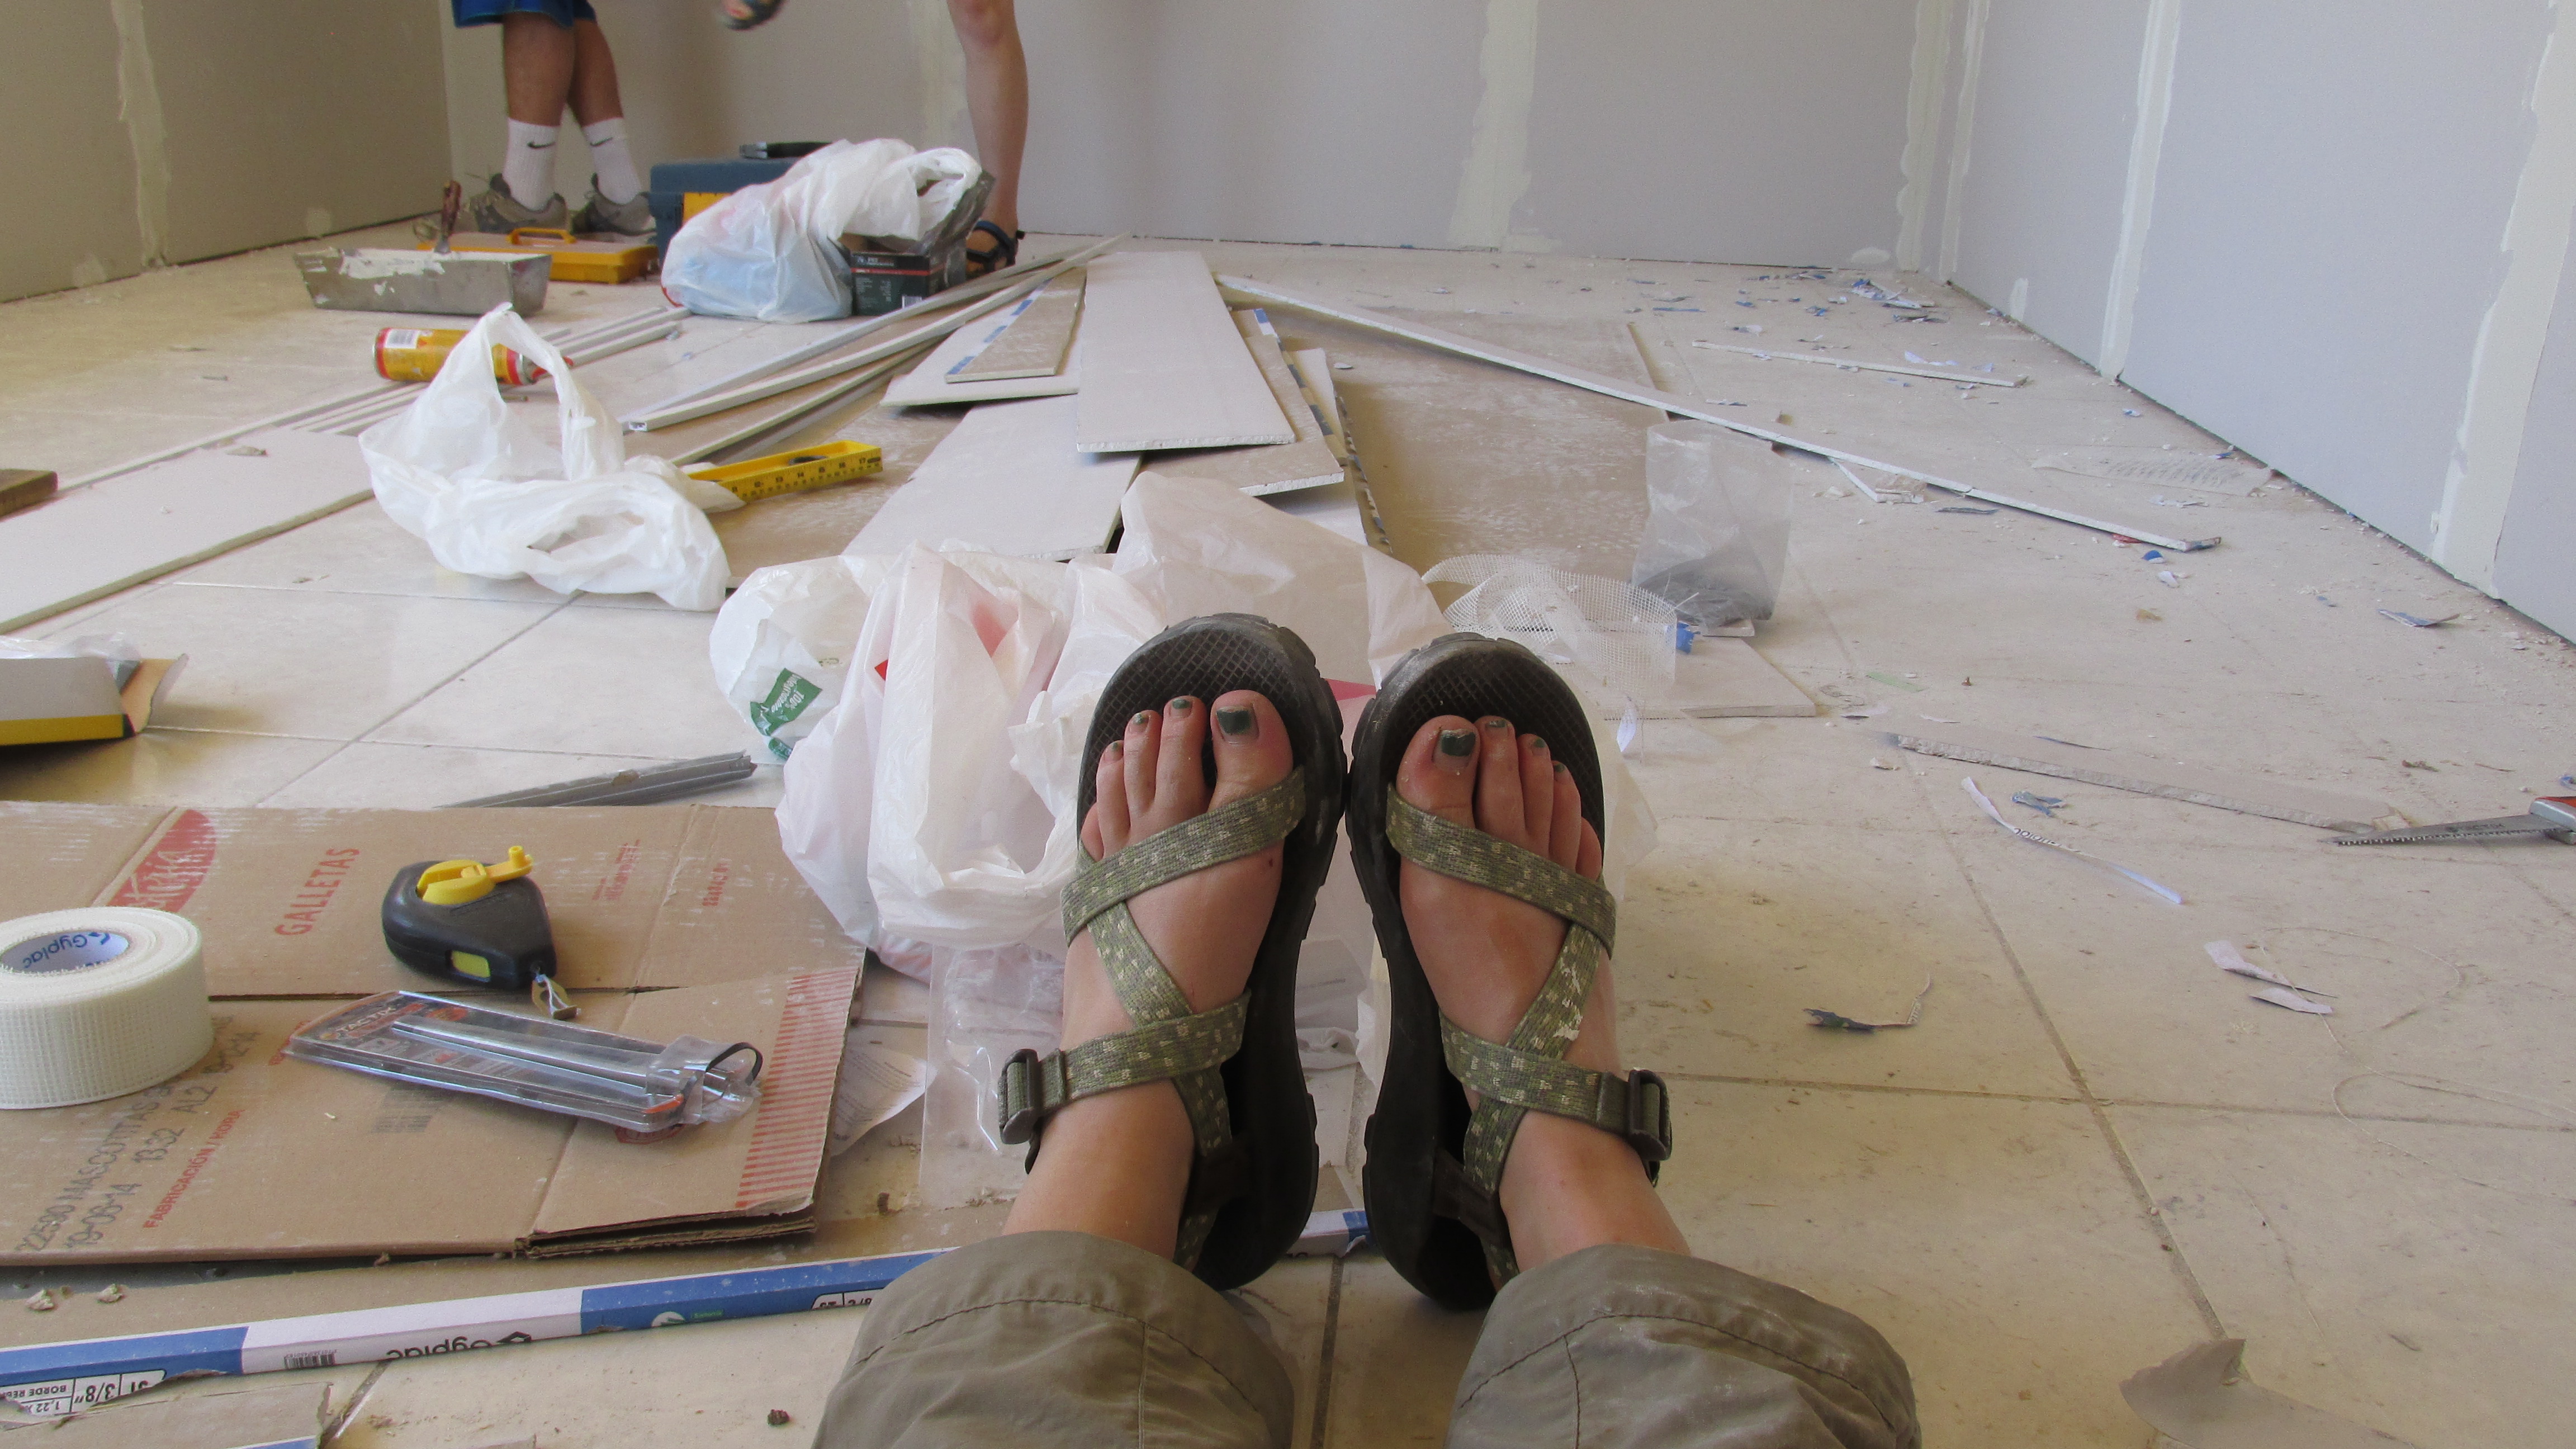 The house, under construction, and my feets with Chacos aka lifesavers of the trip (and probably not good work shoes now that I think of it...)